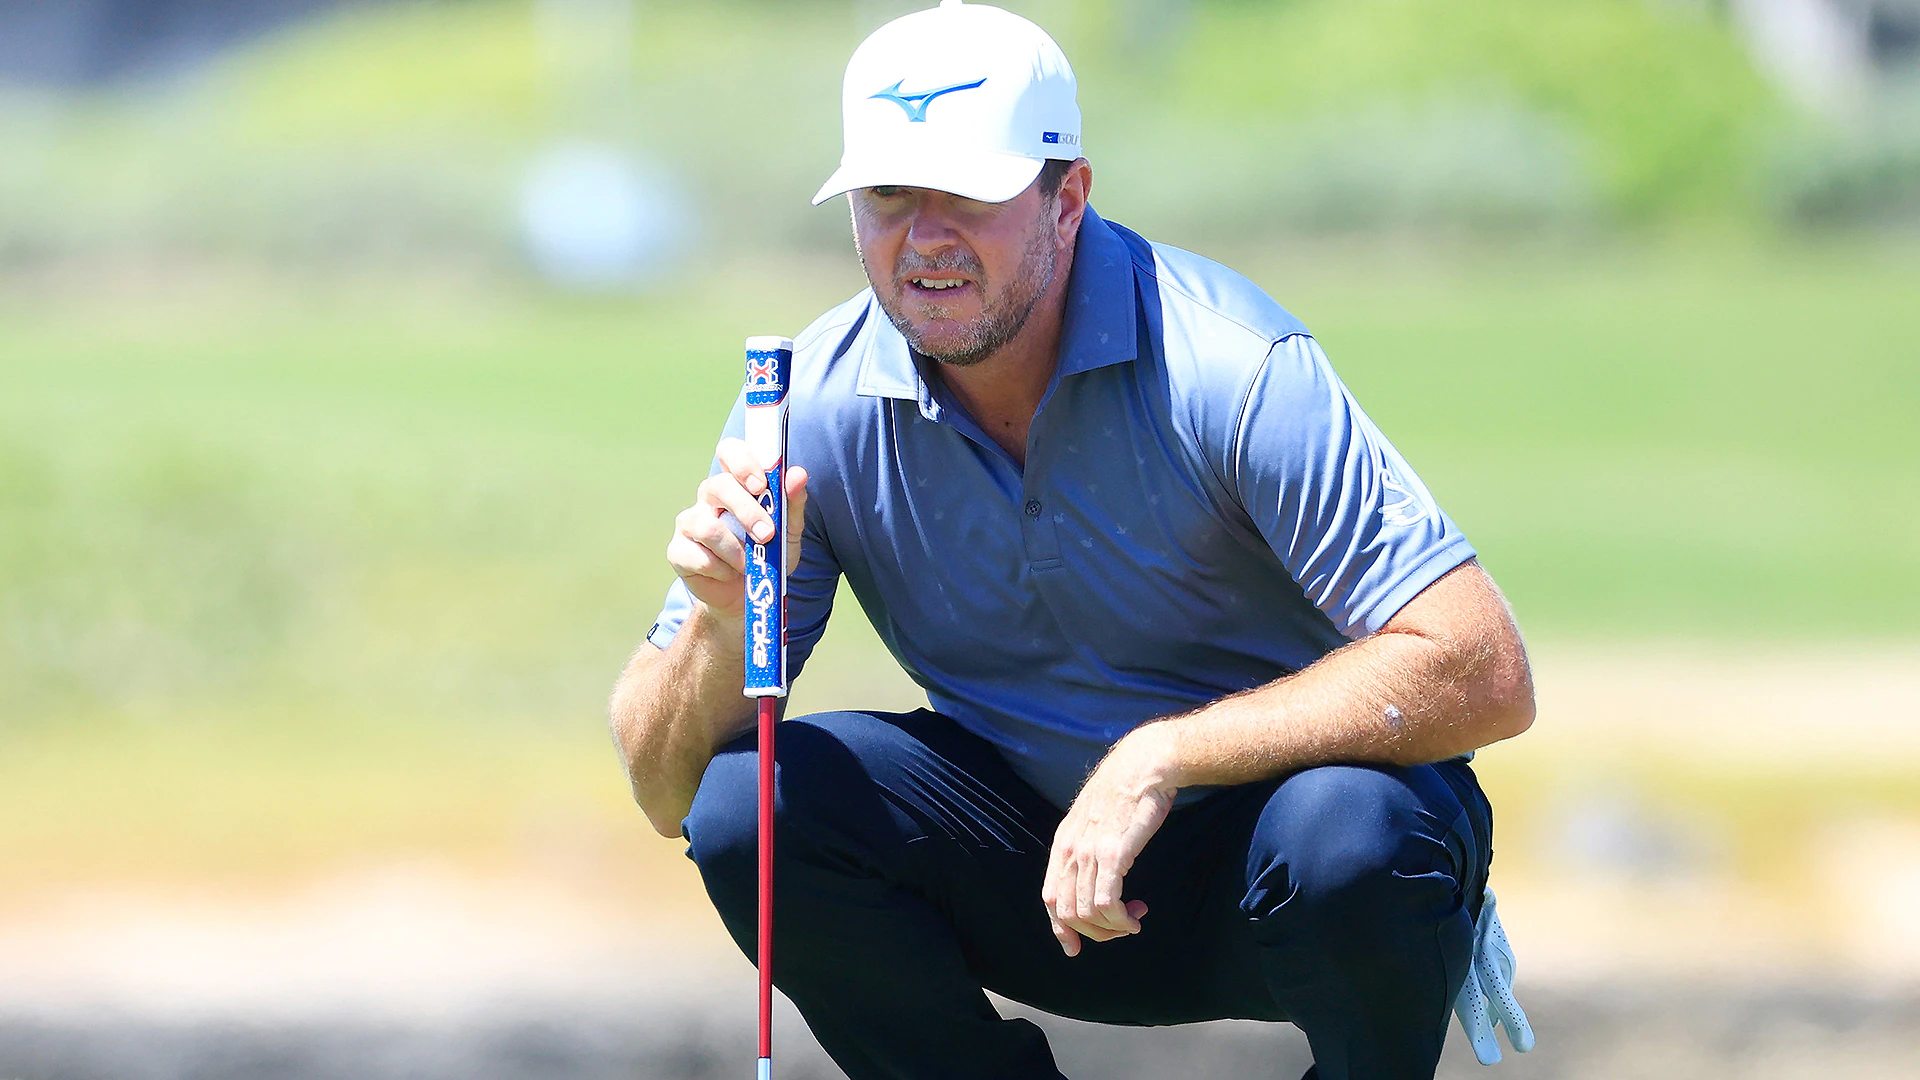 Robert Garrigus confirms request to compete in first LIV Golf tournament